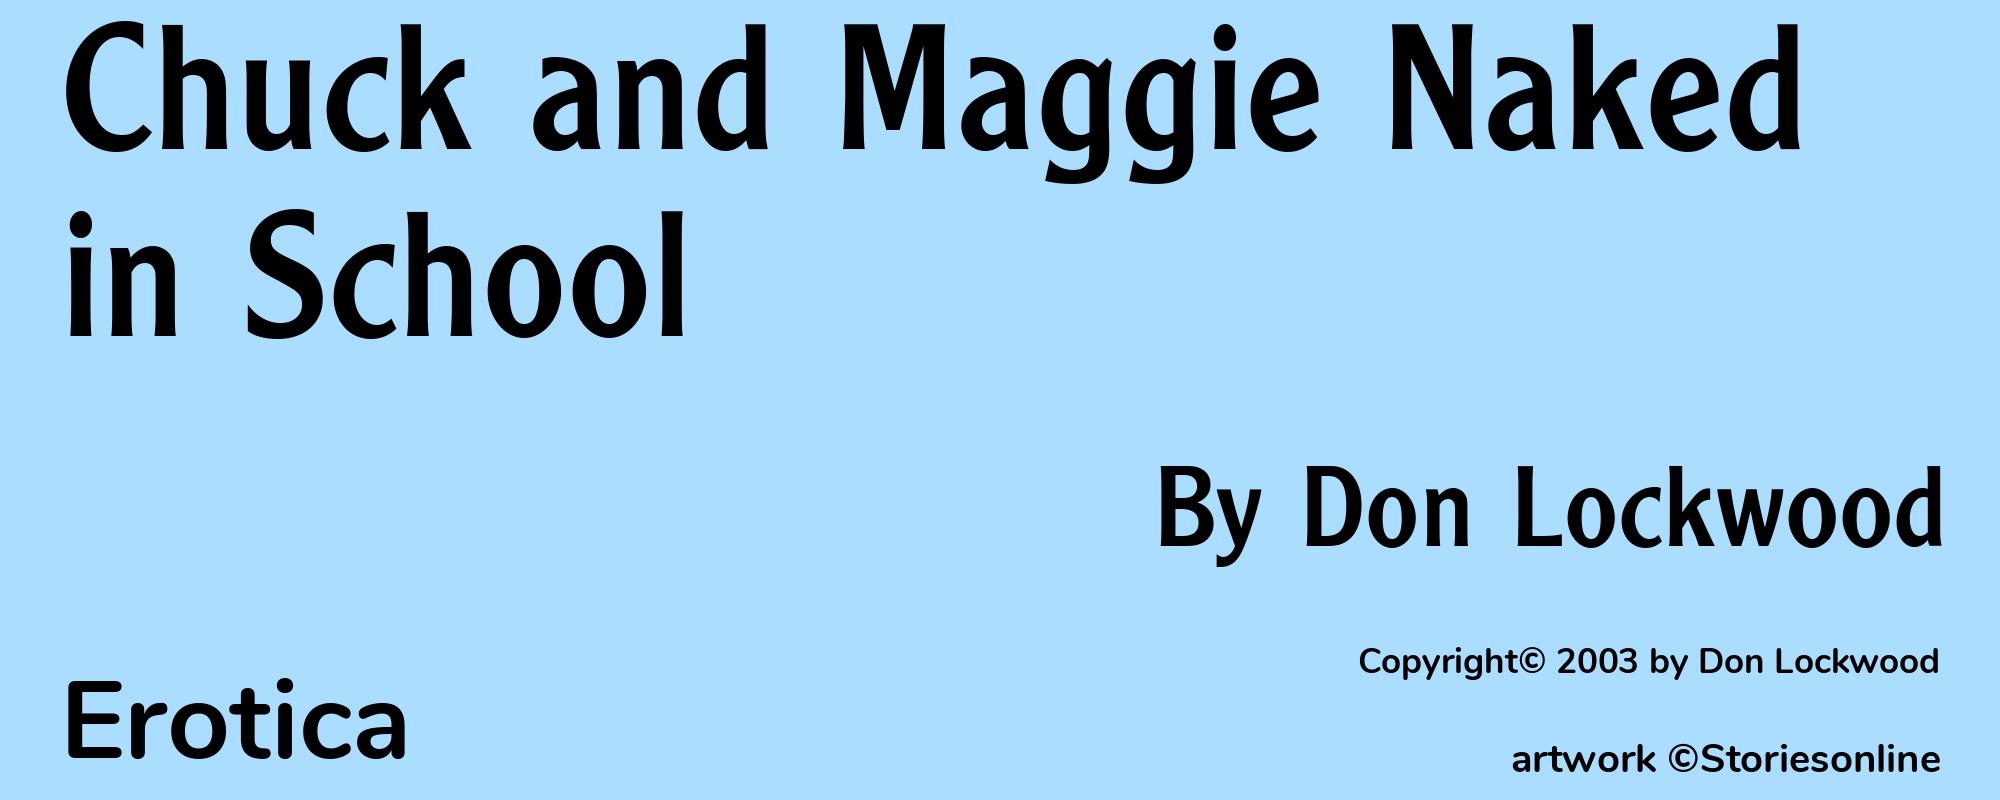 Chuck and Maggie Naked in School - Cover